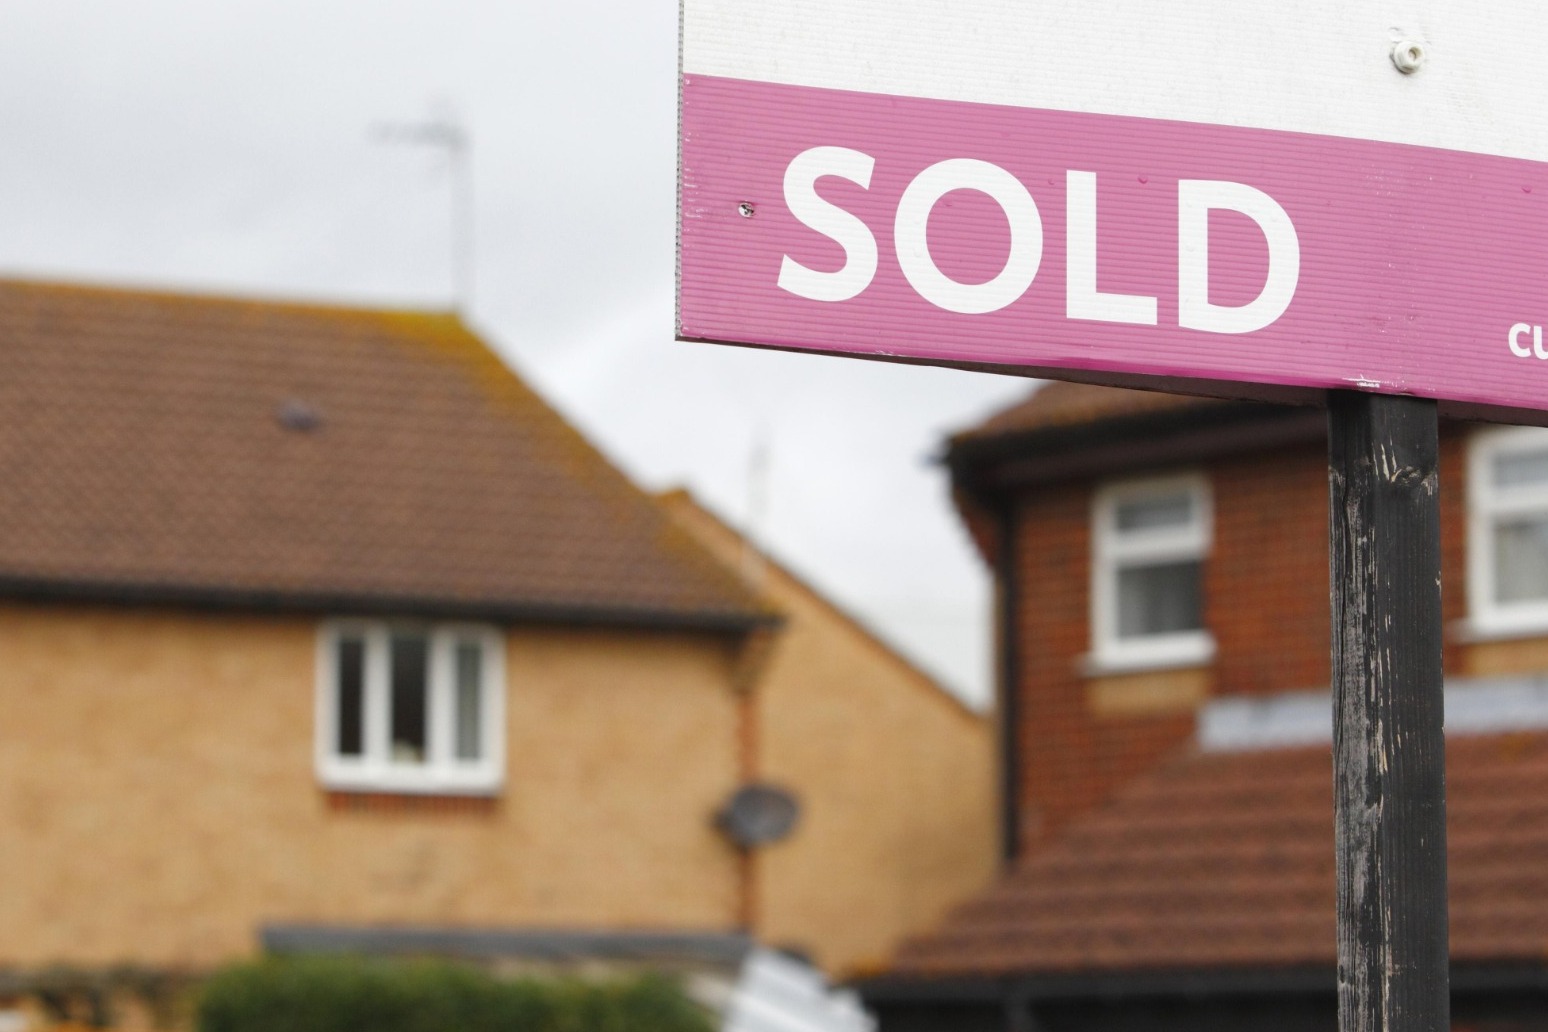 Average price tag on a home has increased by nearly £16,000 since stamp duty cut 